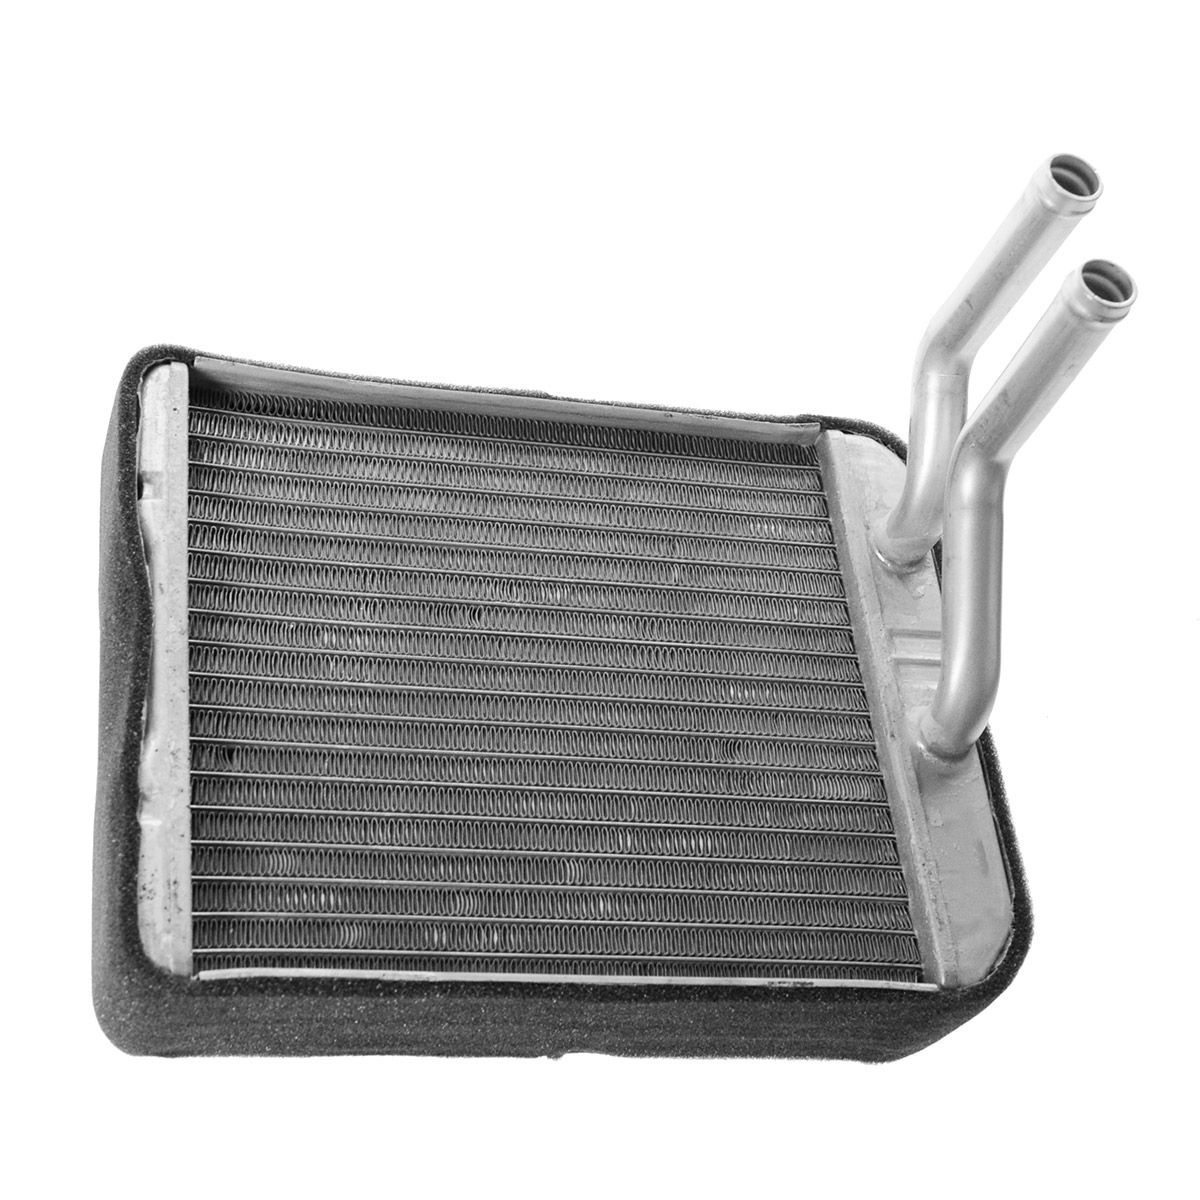 2008 Ford f350 heater core replacement #7